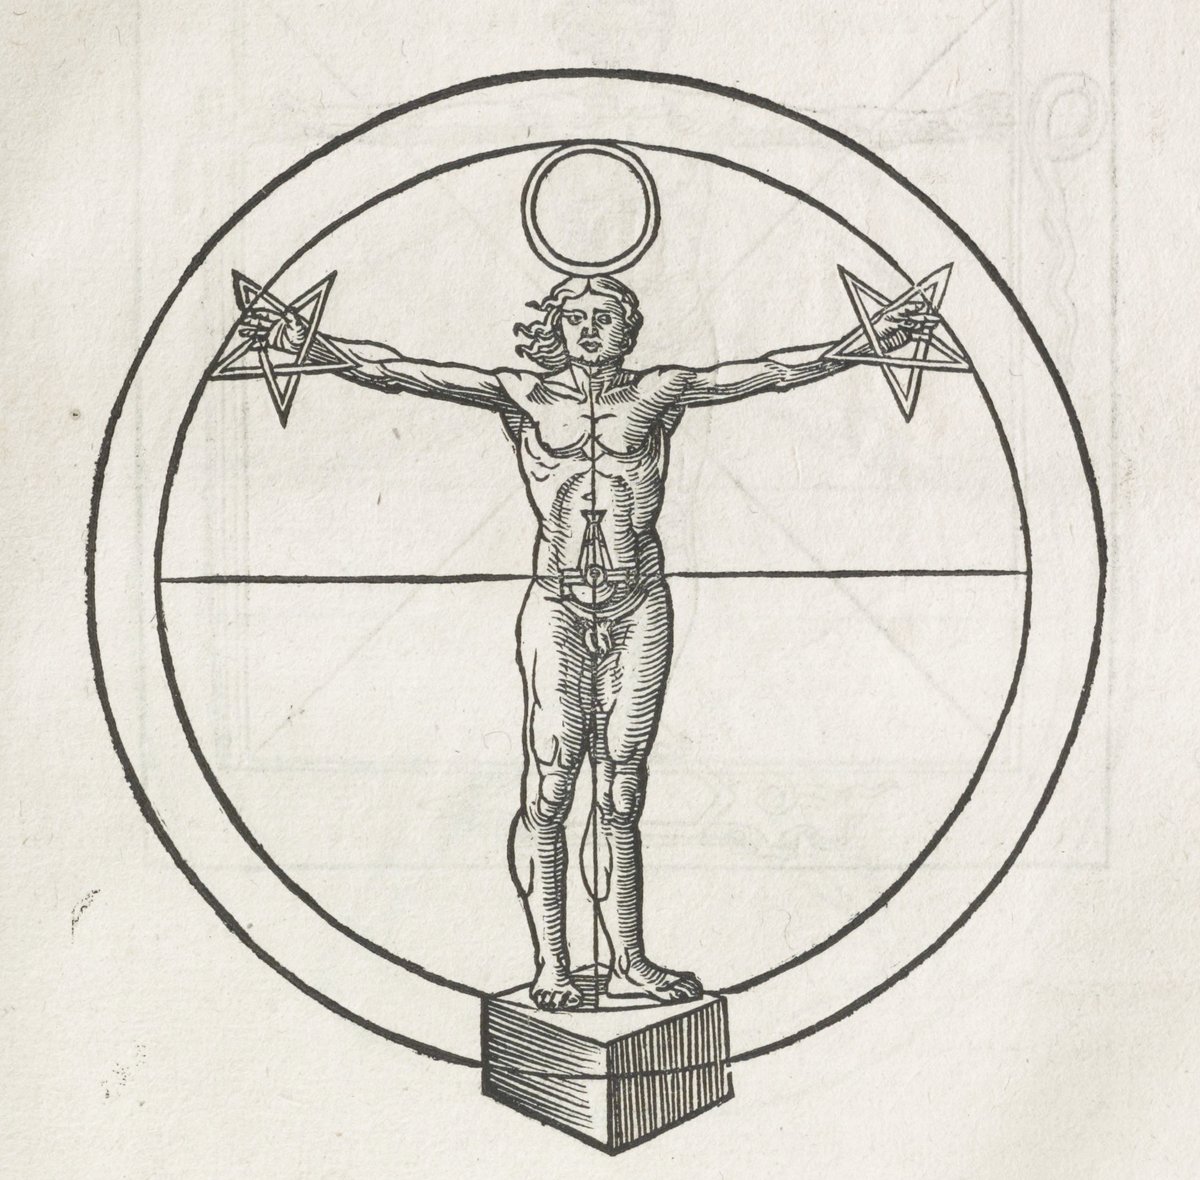 #SundayReads: Anthony Grafton on Renaissance polymath Heinrich Cornelius Agrippa’s occult insights into the structure of the universe: publicdomainreview.org/essay/agrippa-… #magic